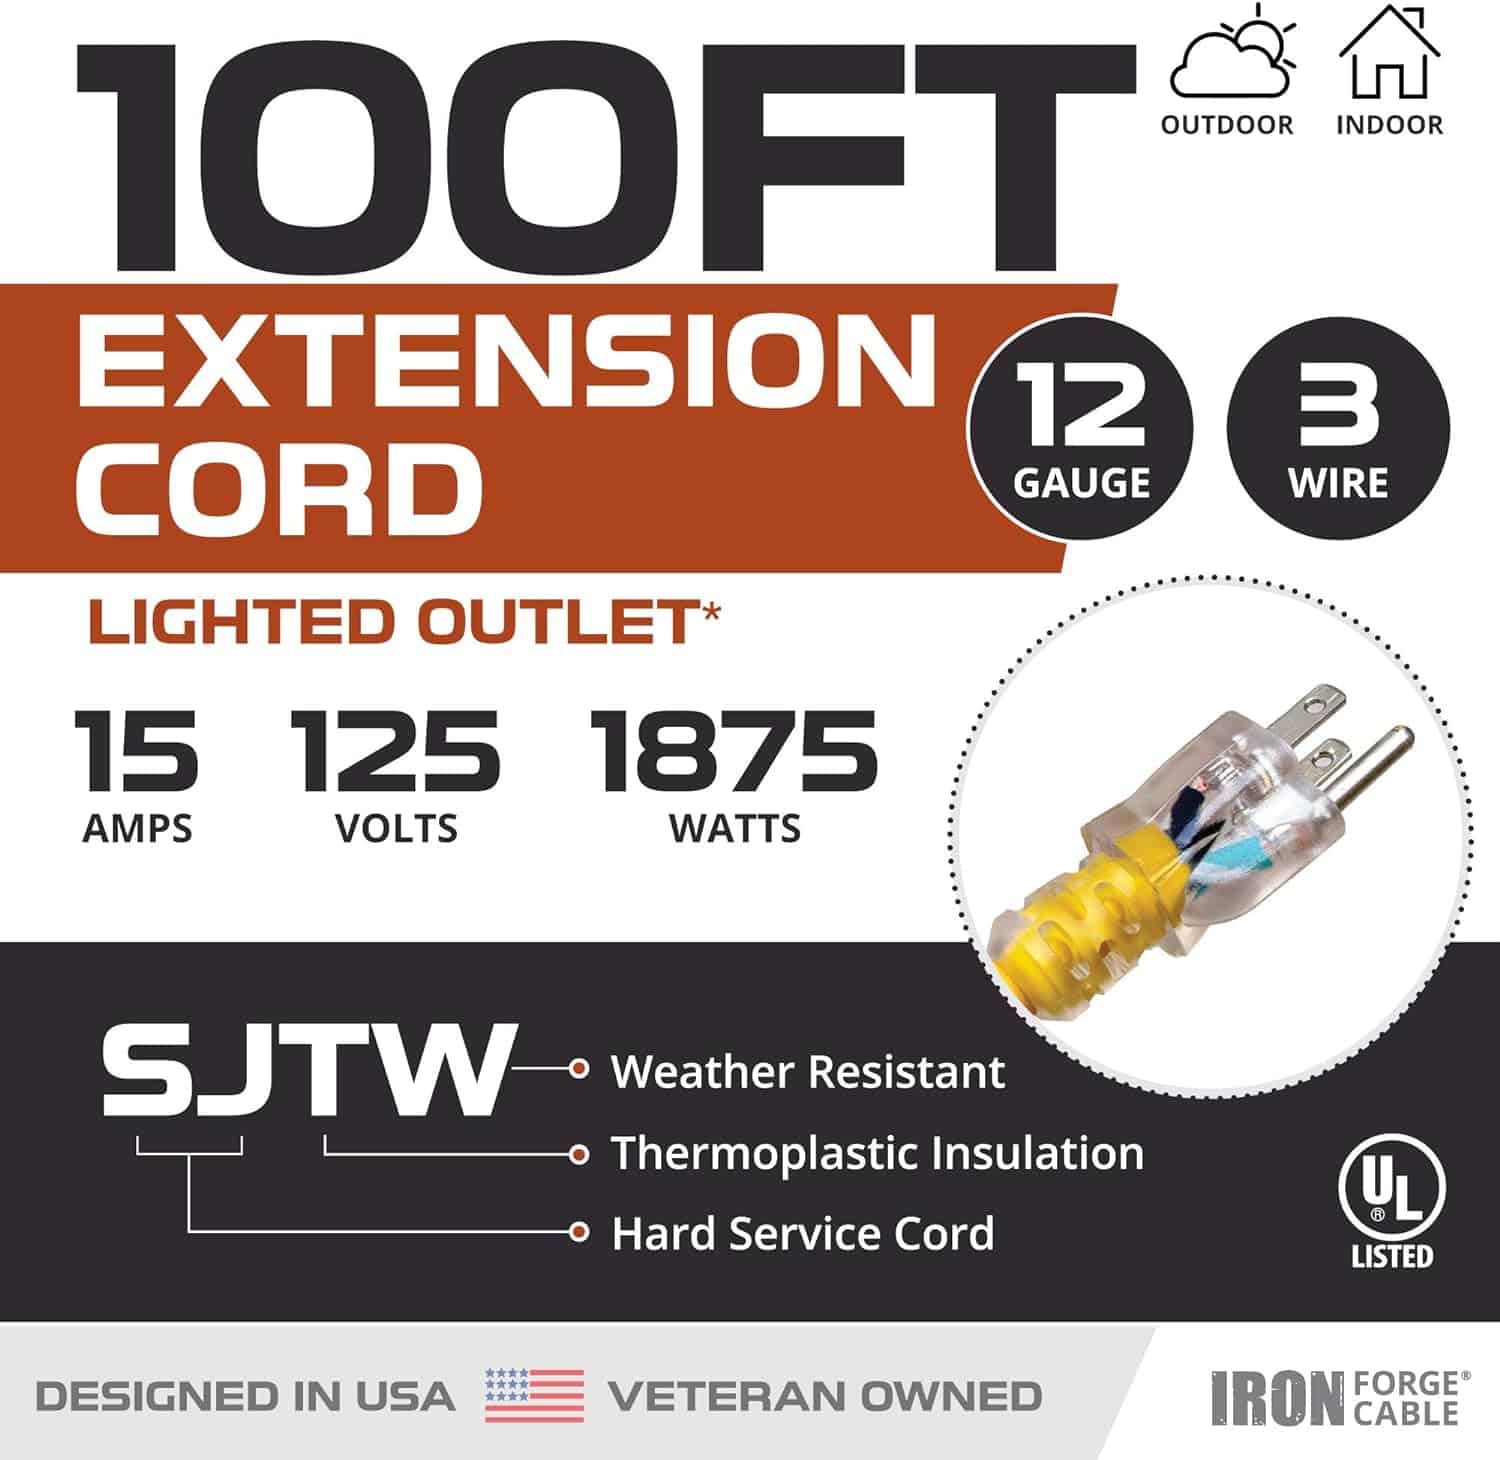 IRON-FORGE-CABLE-2-Pack-of-100-Foot-Lighted-Outdoor-Extension-Cord-12-3-SJTW-Heavy-Duty-Yellow-Extension-Cable-with-3-Prong-Grounded-Plug-for-Safety-15-AMP-Great-for-Garden-and-Major-Appliances